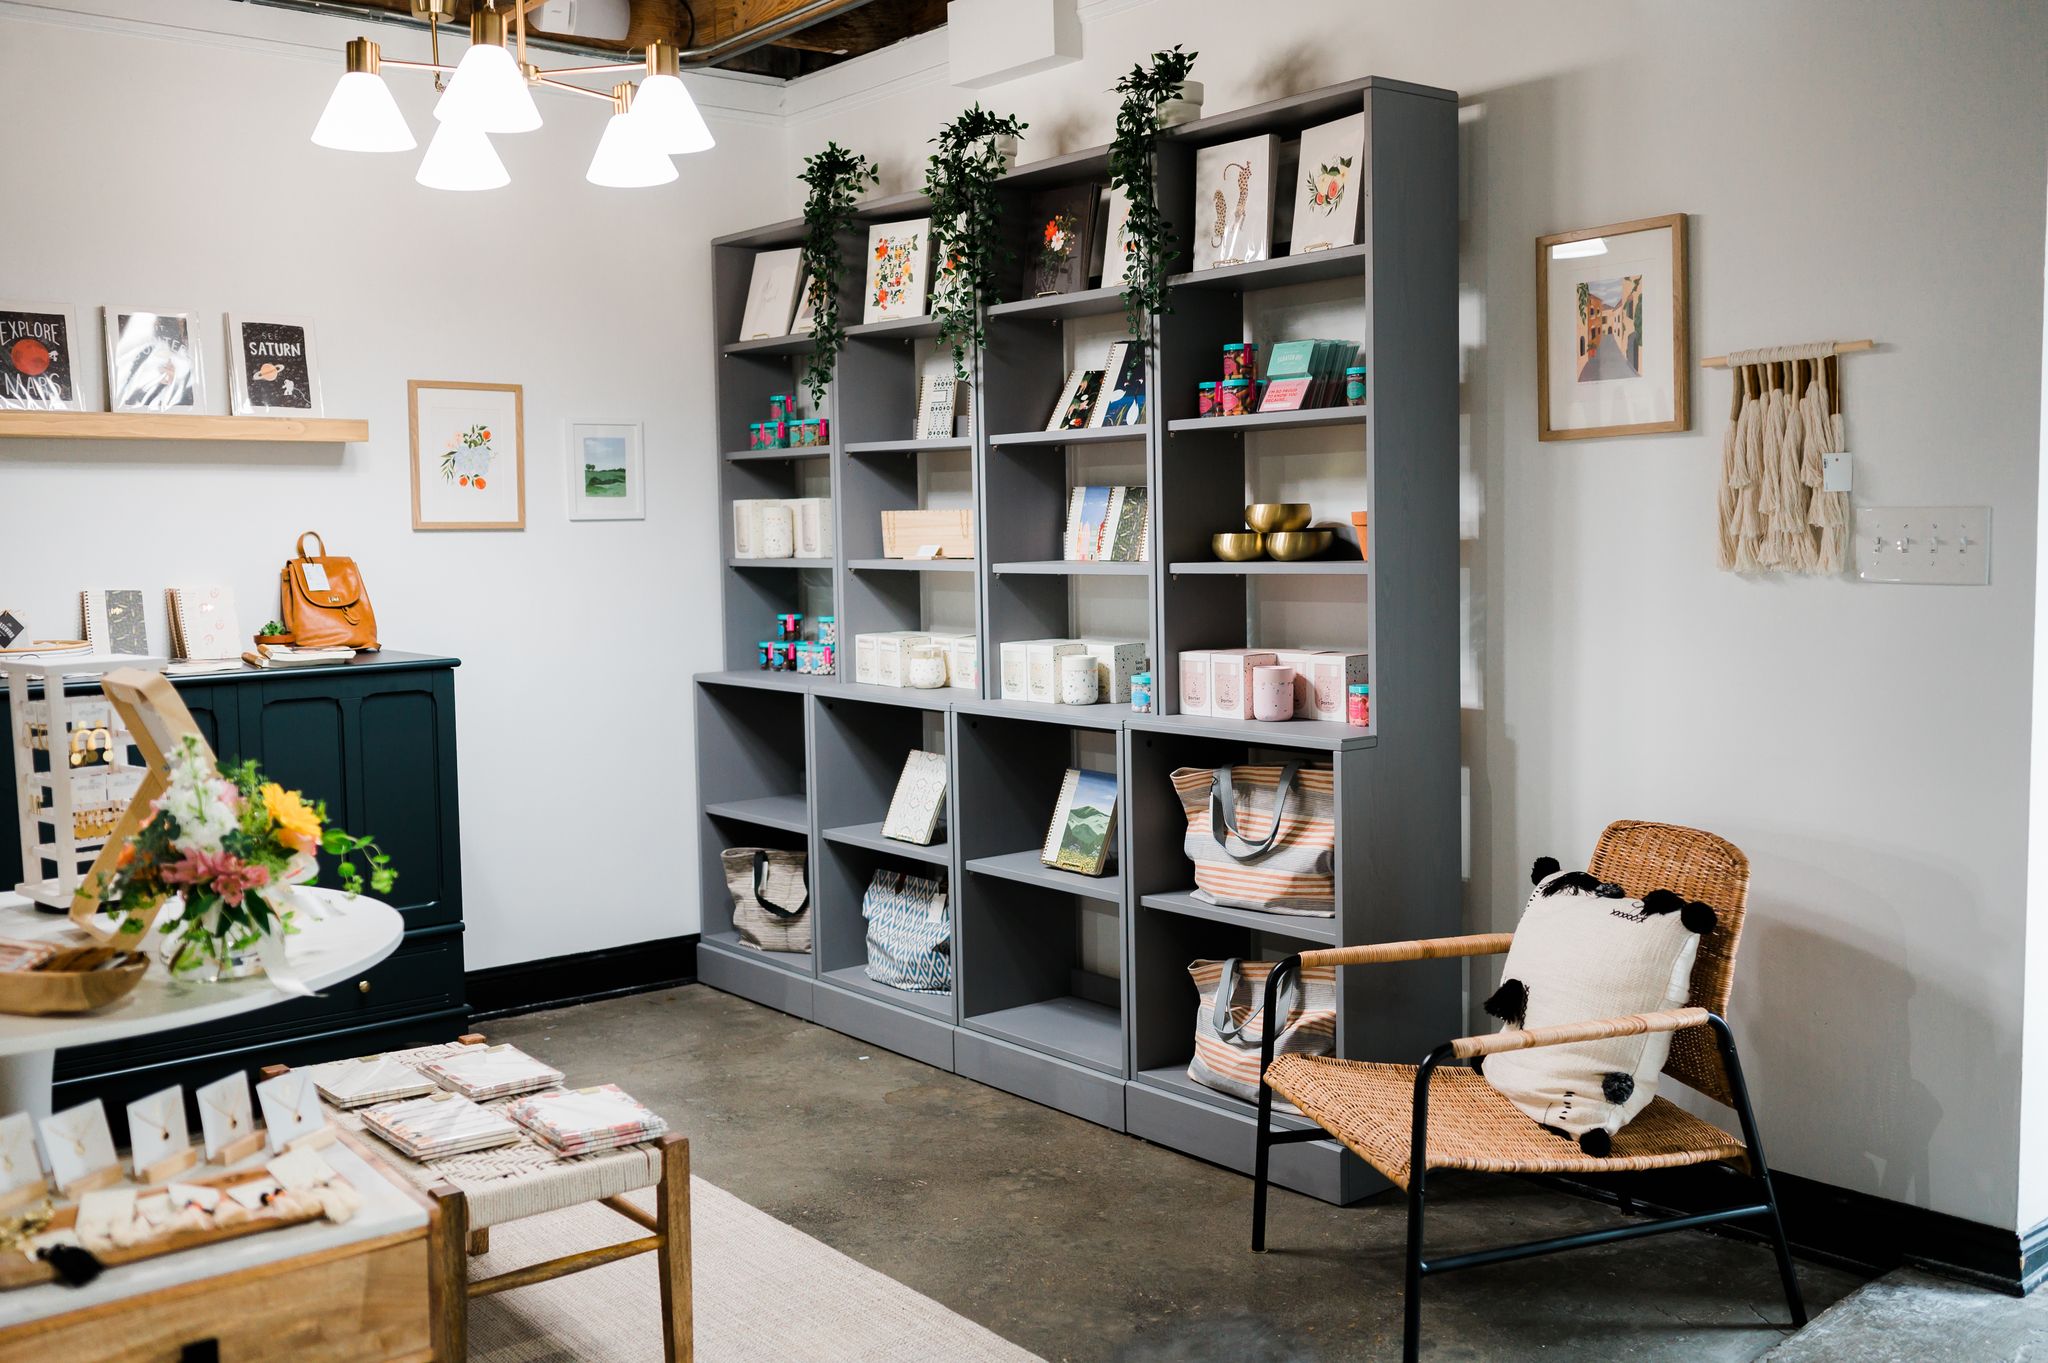 Pen+Pillar in High Point, NC has a new storefront with shelves of small-business products.